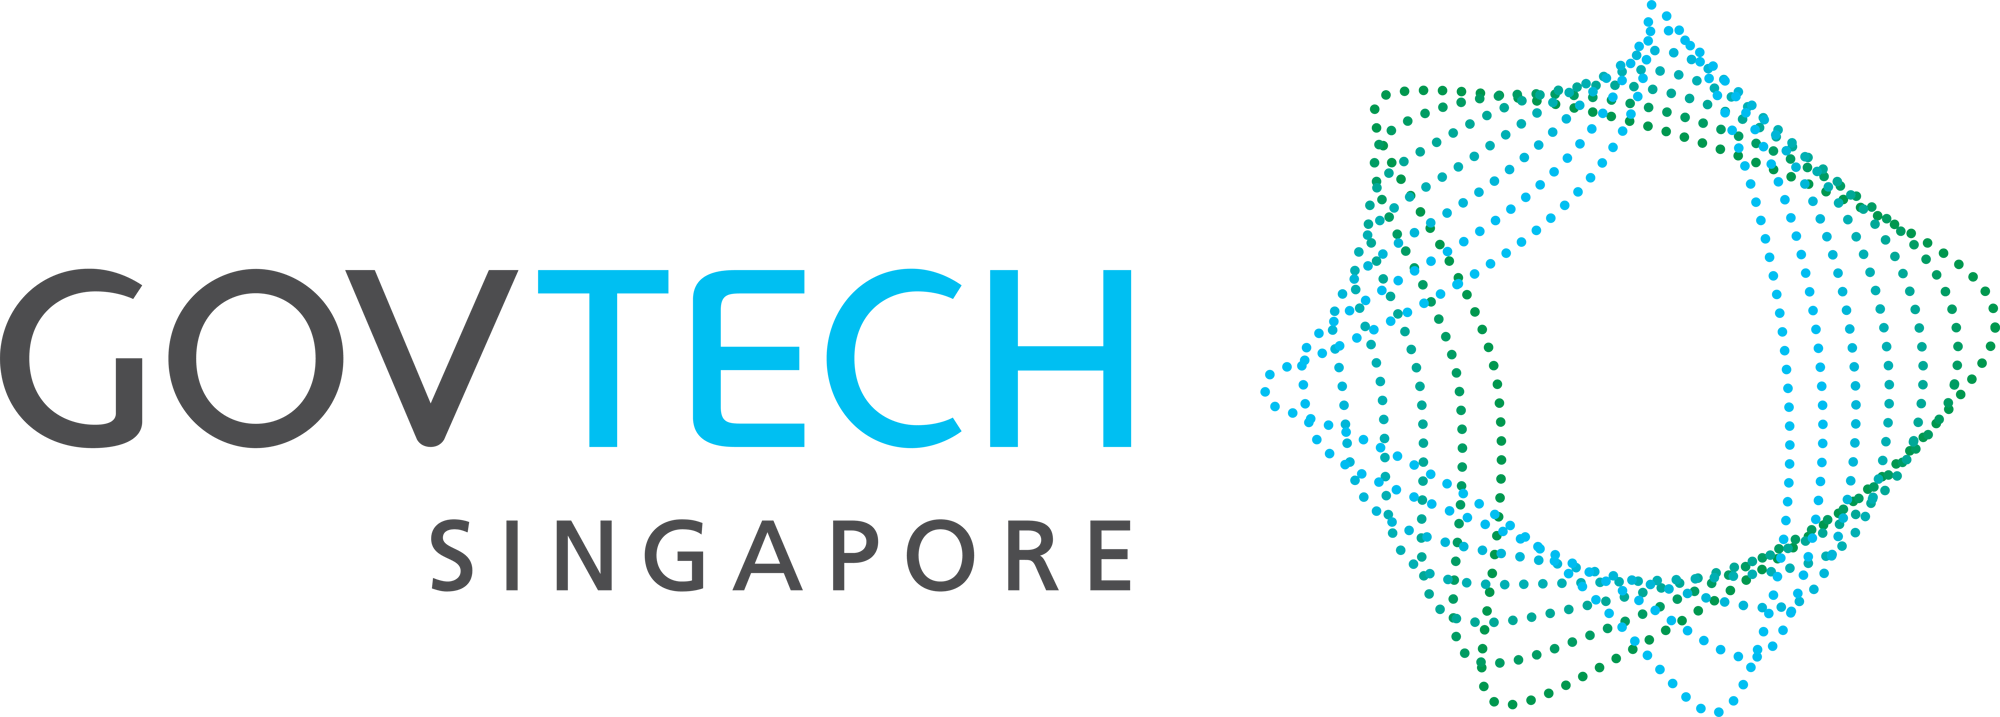 GovTech Singapore at 1000mm_CMYK converted to RGB